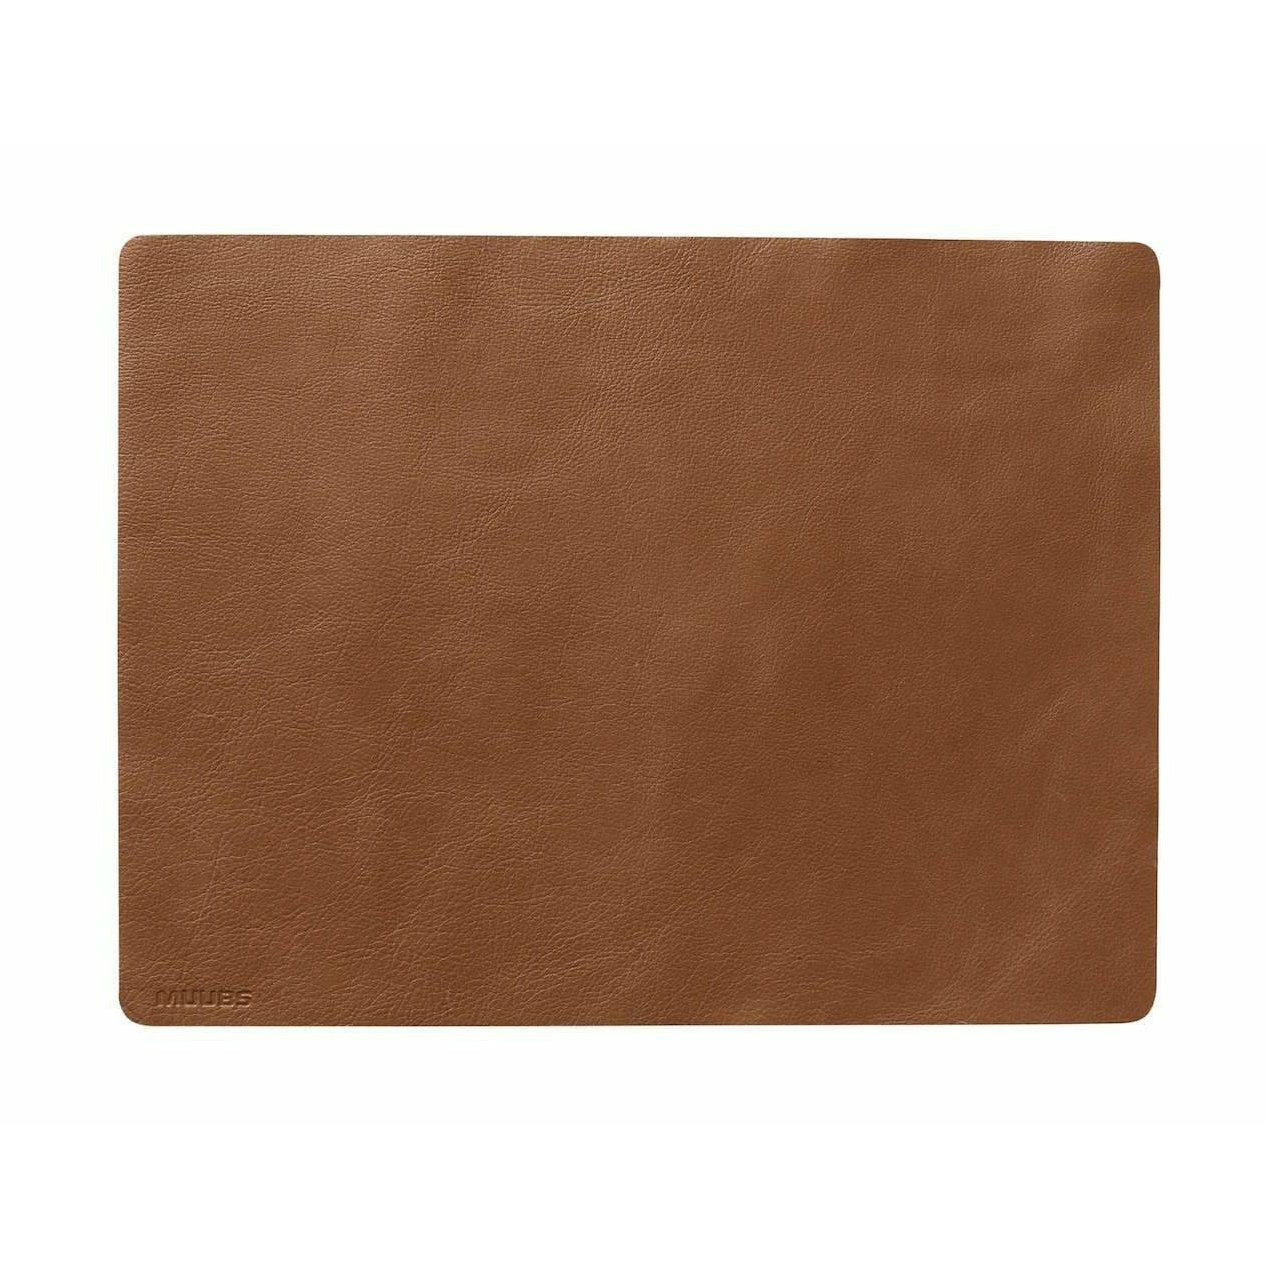 Muubs Camou placemat 45 cm, bruin leer